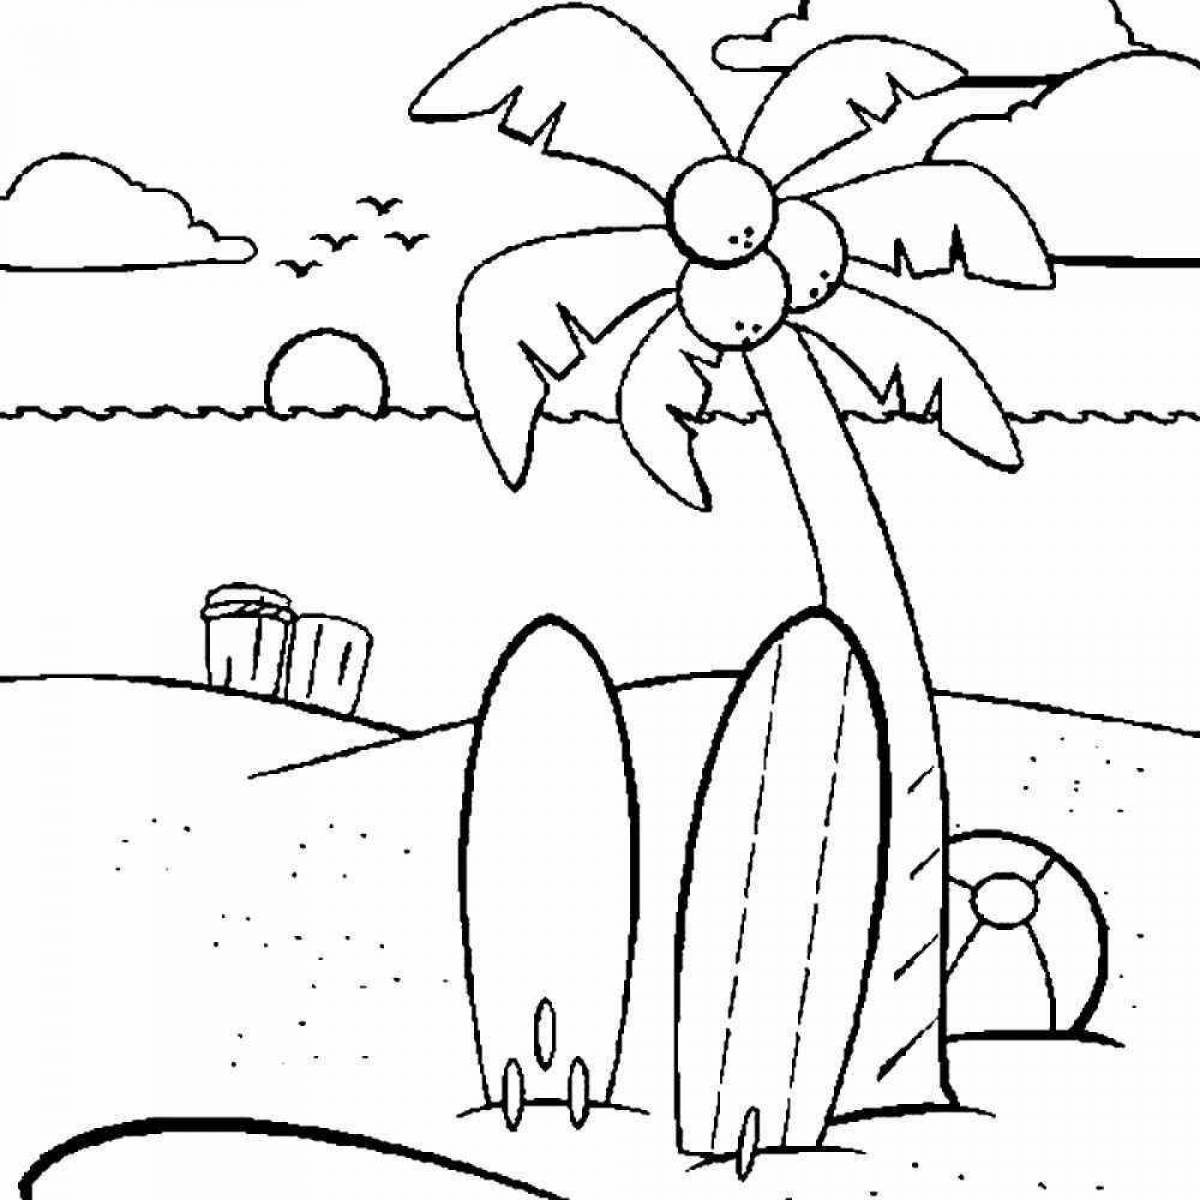 Joyful nature coloring pages for boys